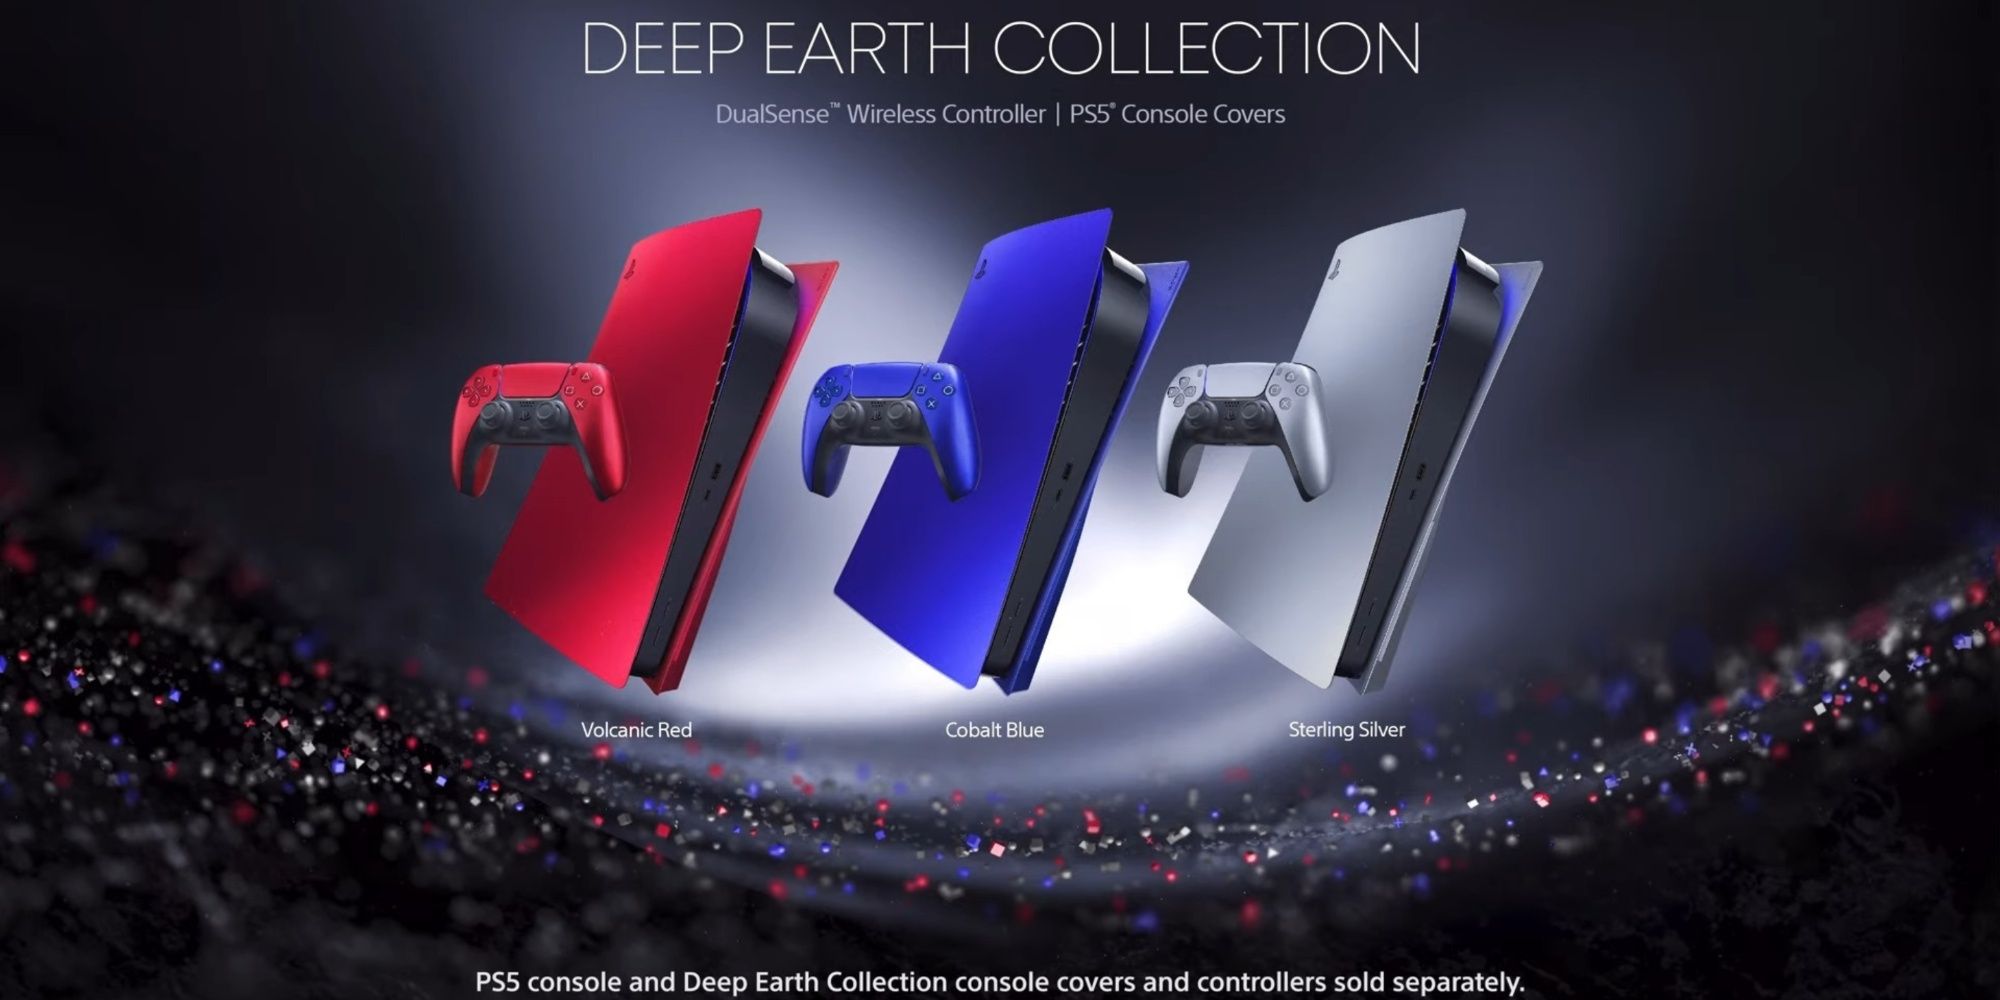 ps5 deep earth collection covers and dualsense controllers